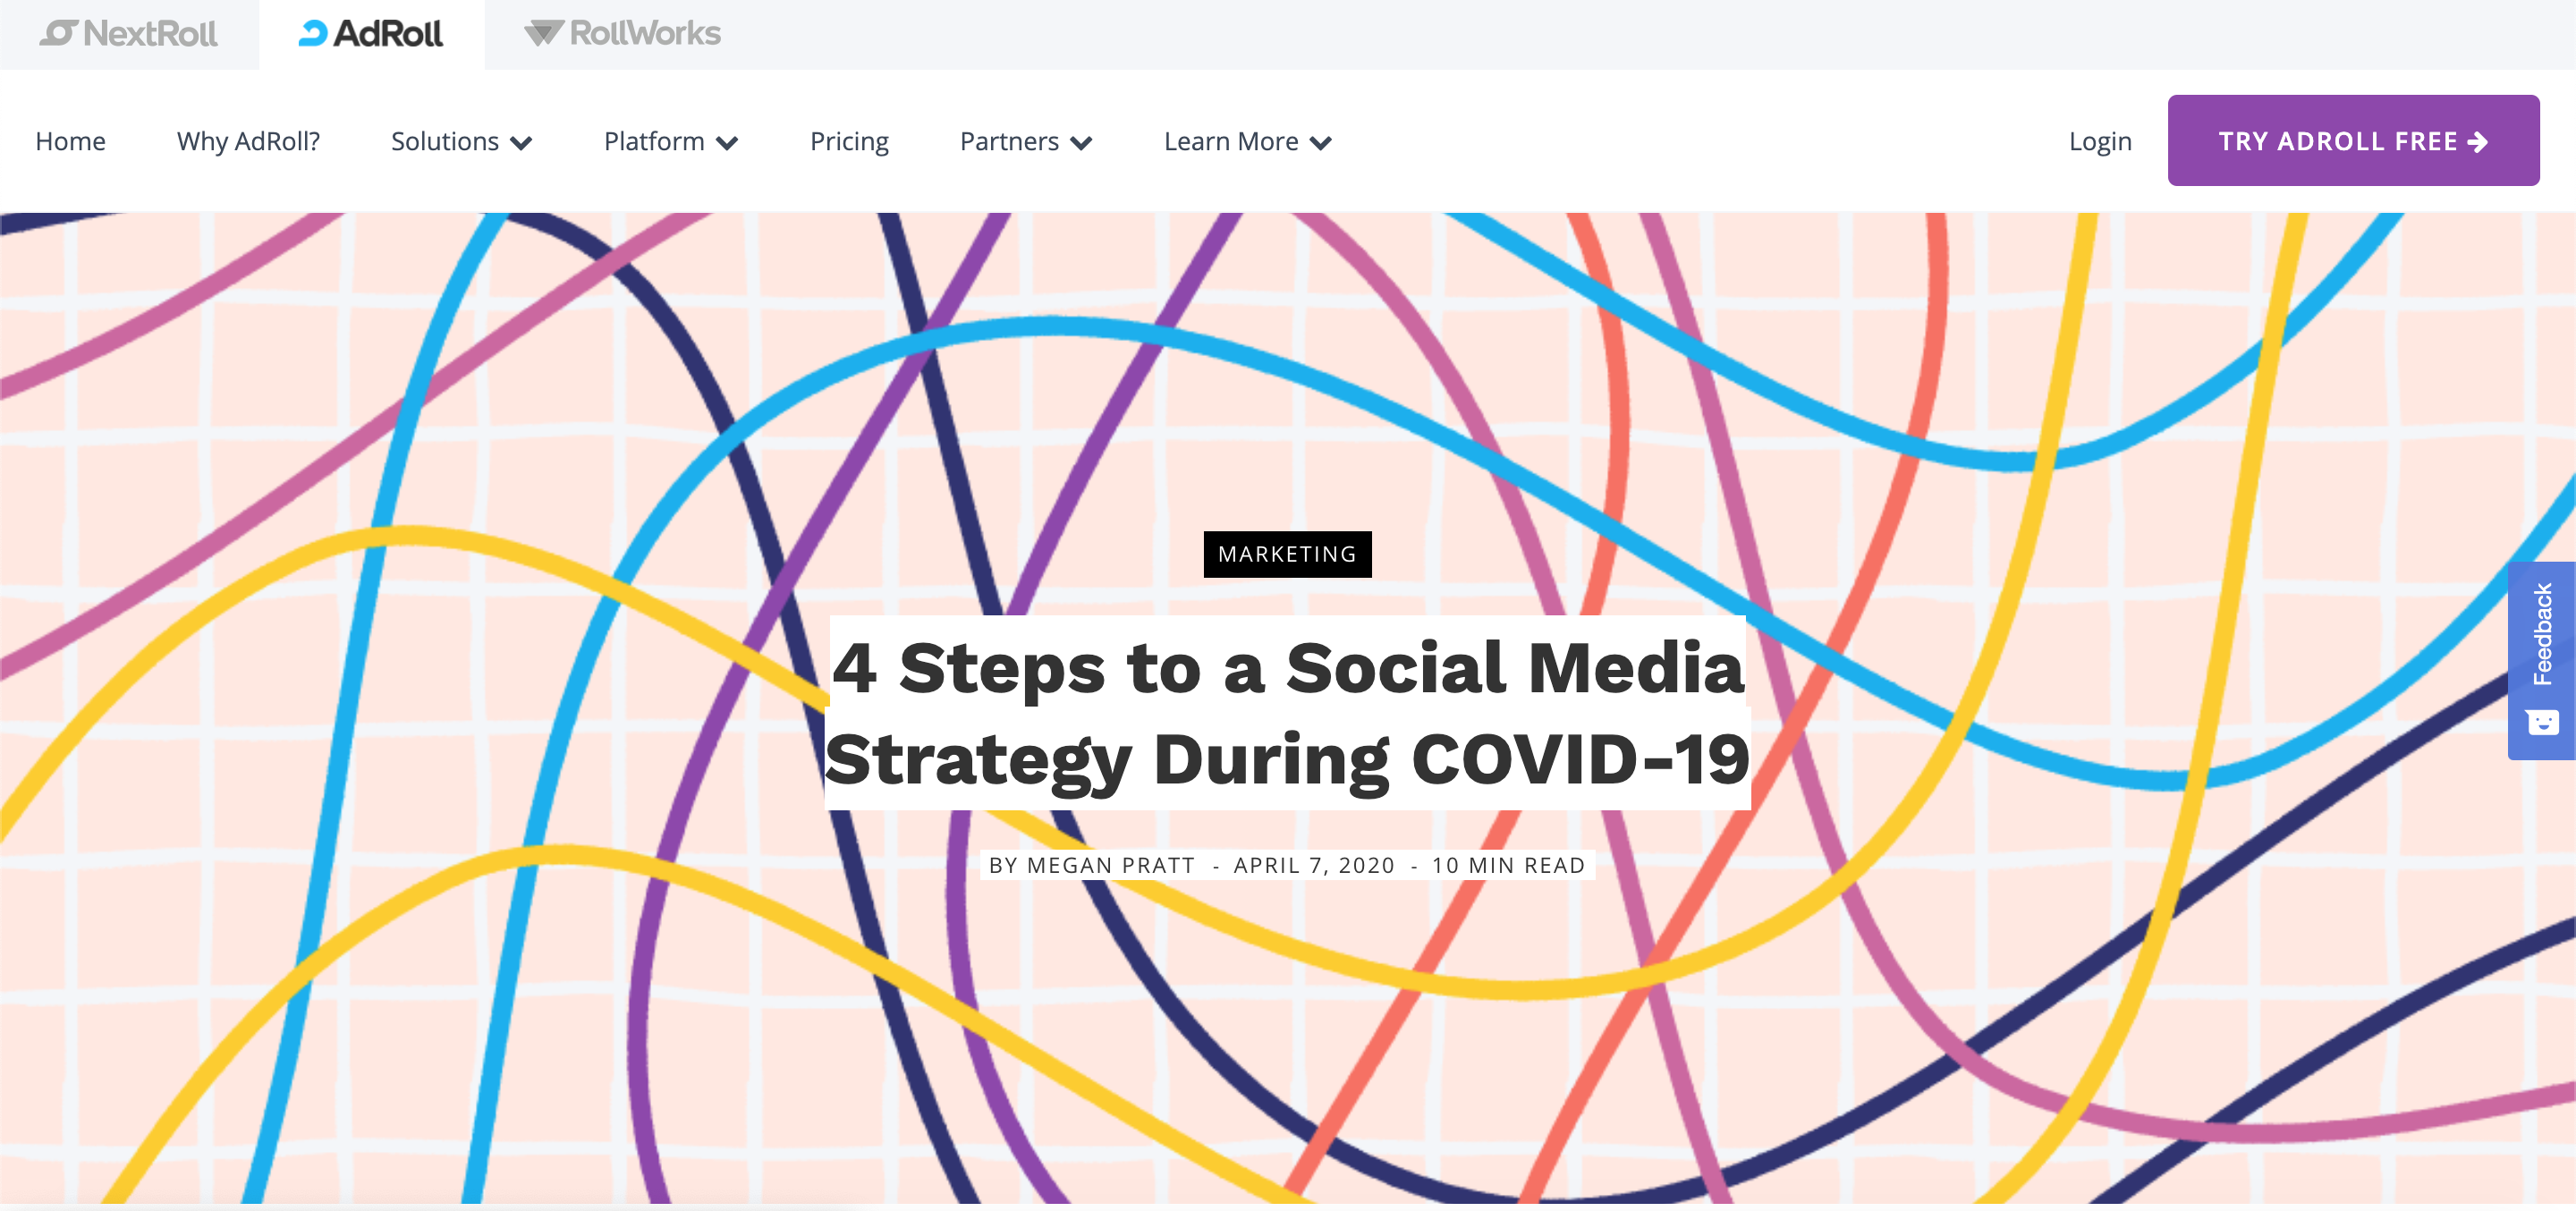 4 Steps to a Social Media Strategy During COVID-19 by AdRoll